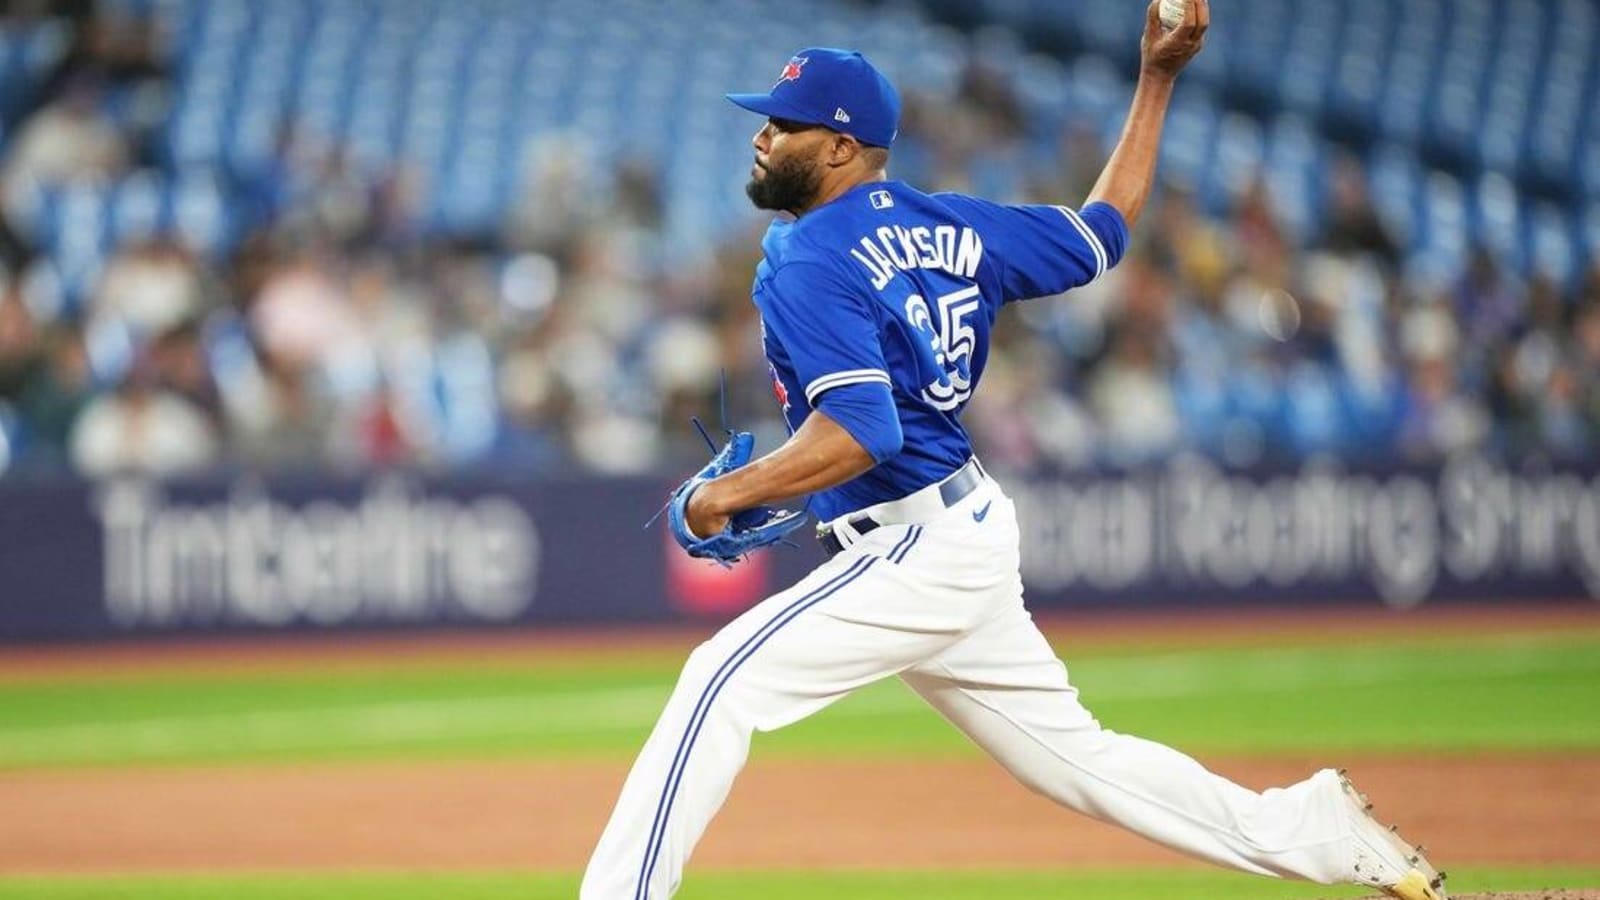 Jays RHP Jay Jackson: I was tipping pitches vs. Yanks